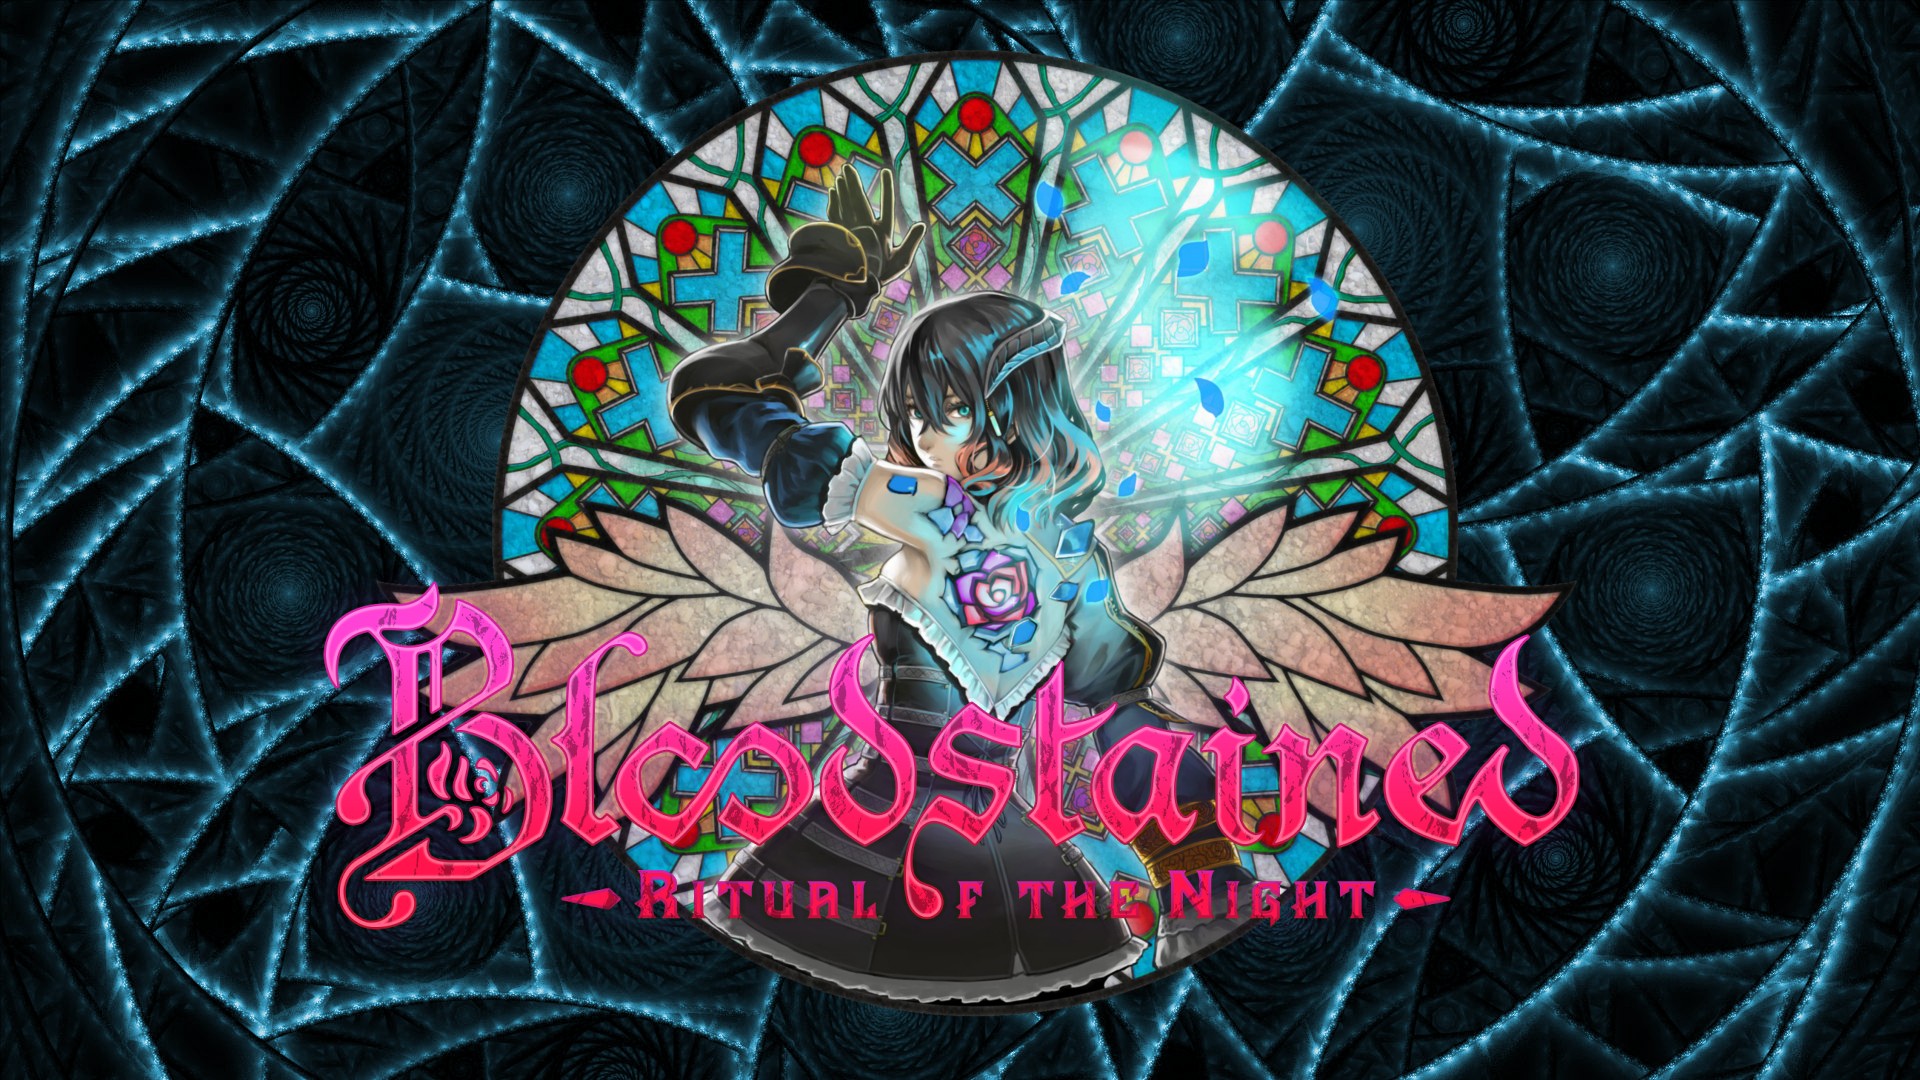 Video Games Bloodstained Ritual Of The Night Miriam Bloodstained Stained Glass 1920x1080